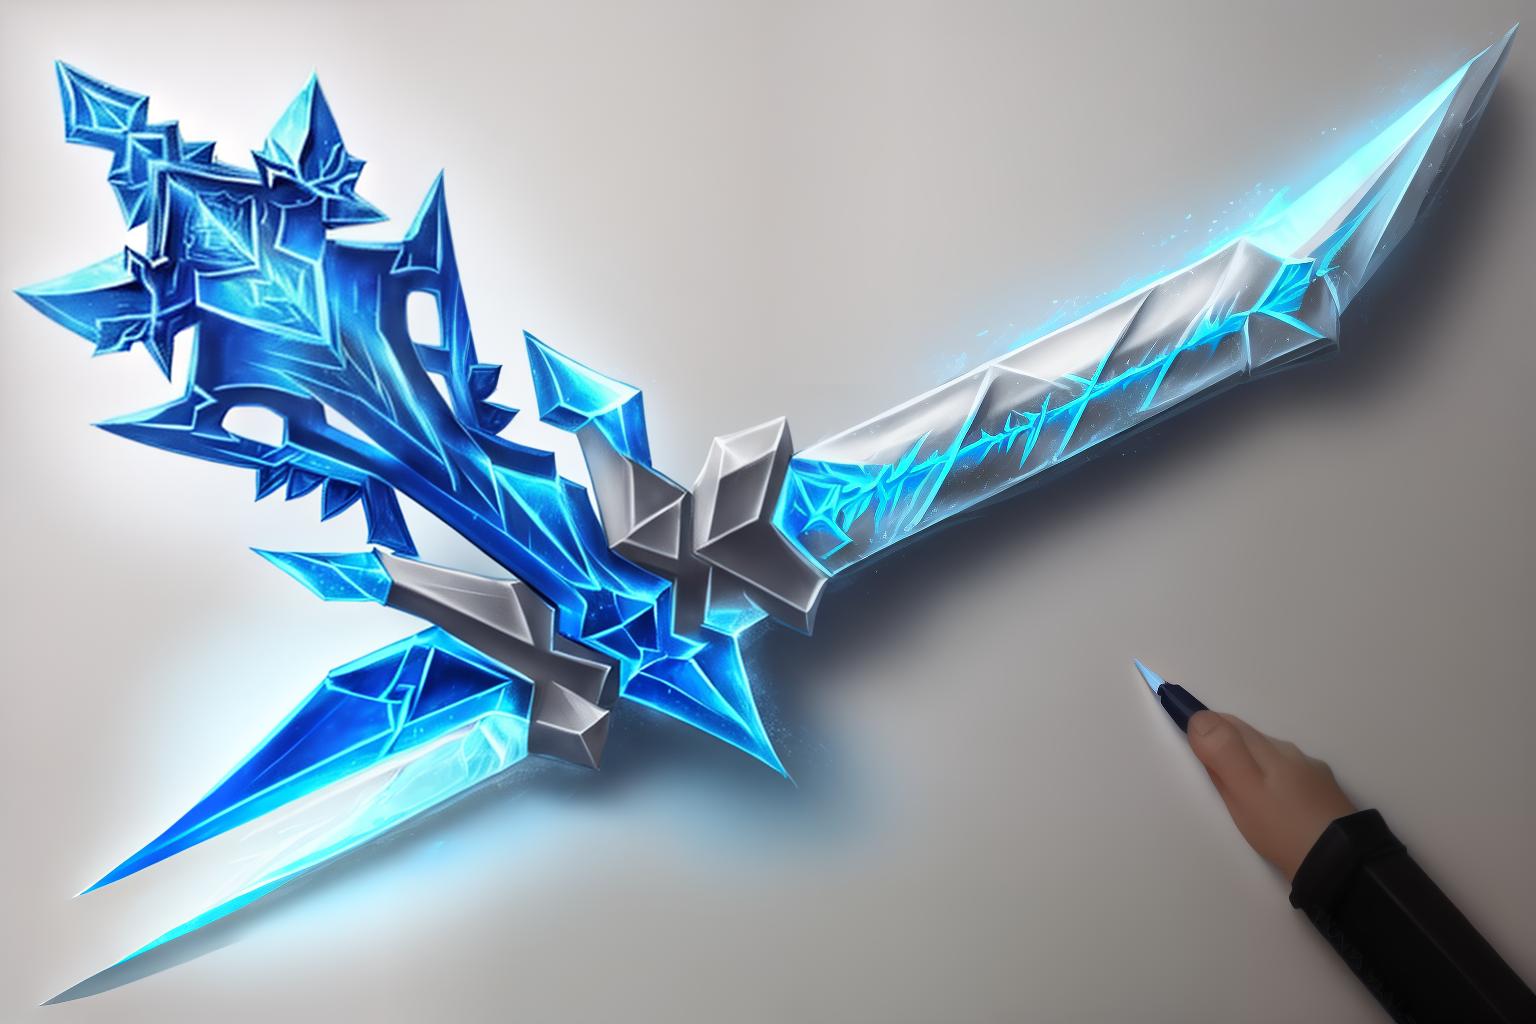  /draw a ice sword, frost